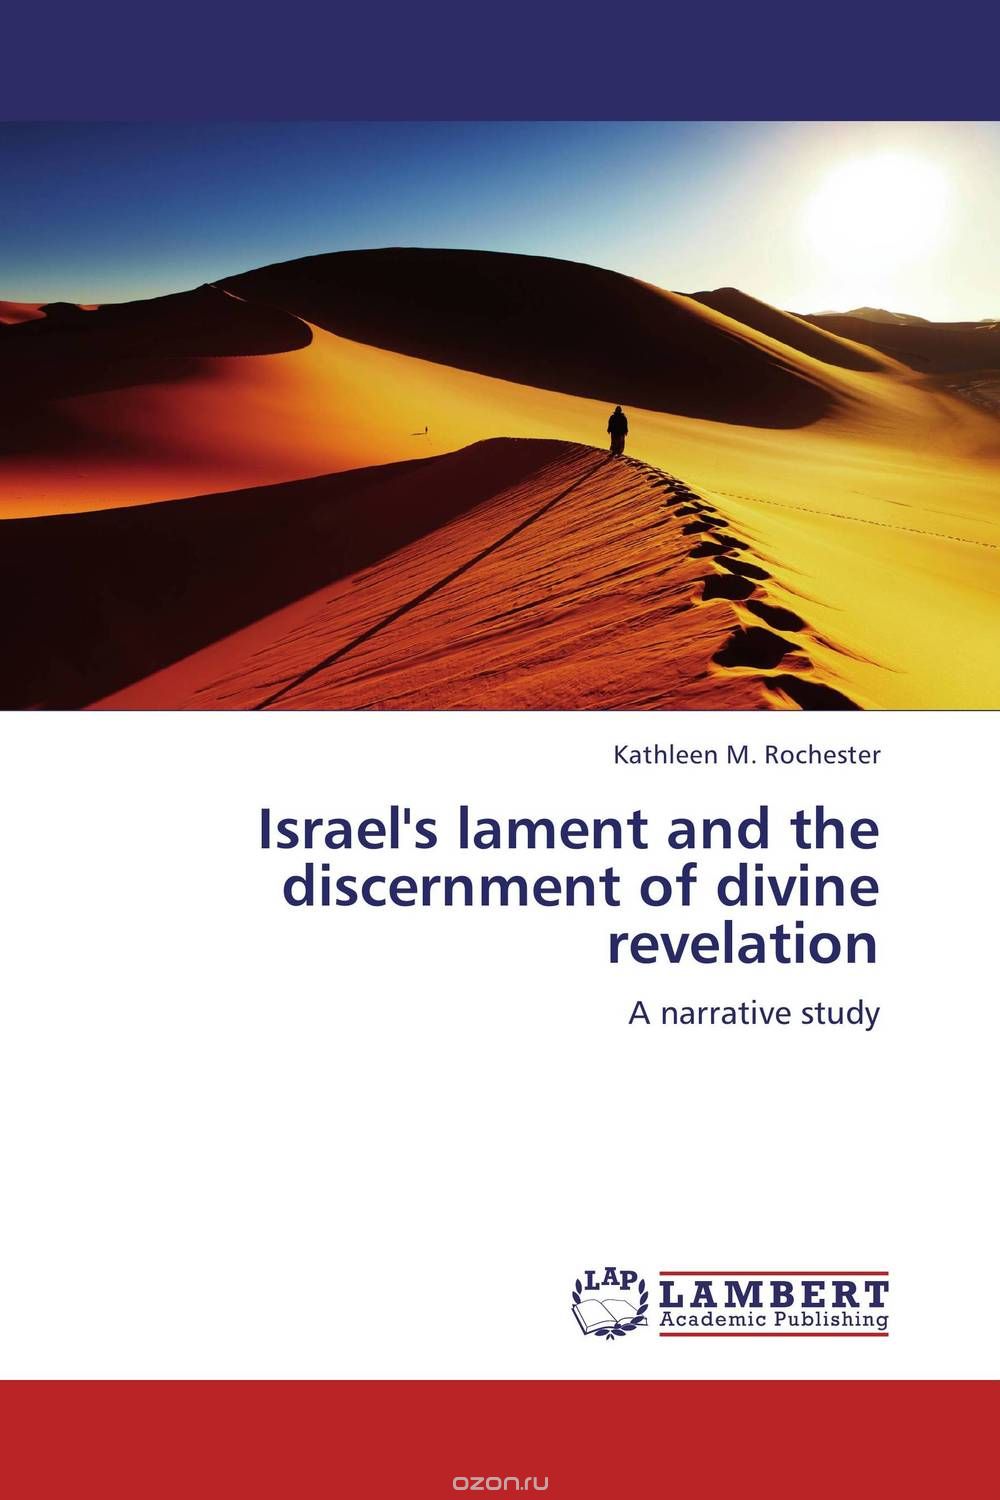 Israel's lament and the discernment of divine revelation